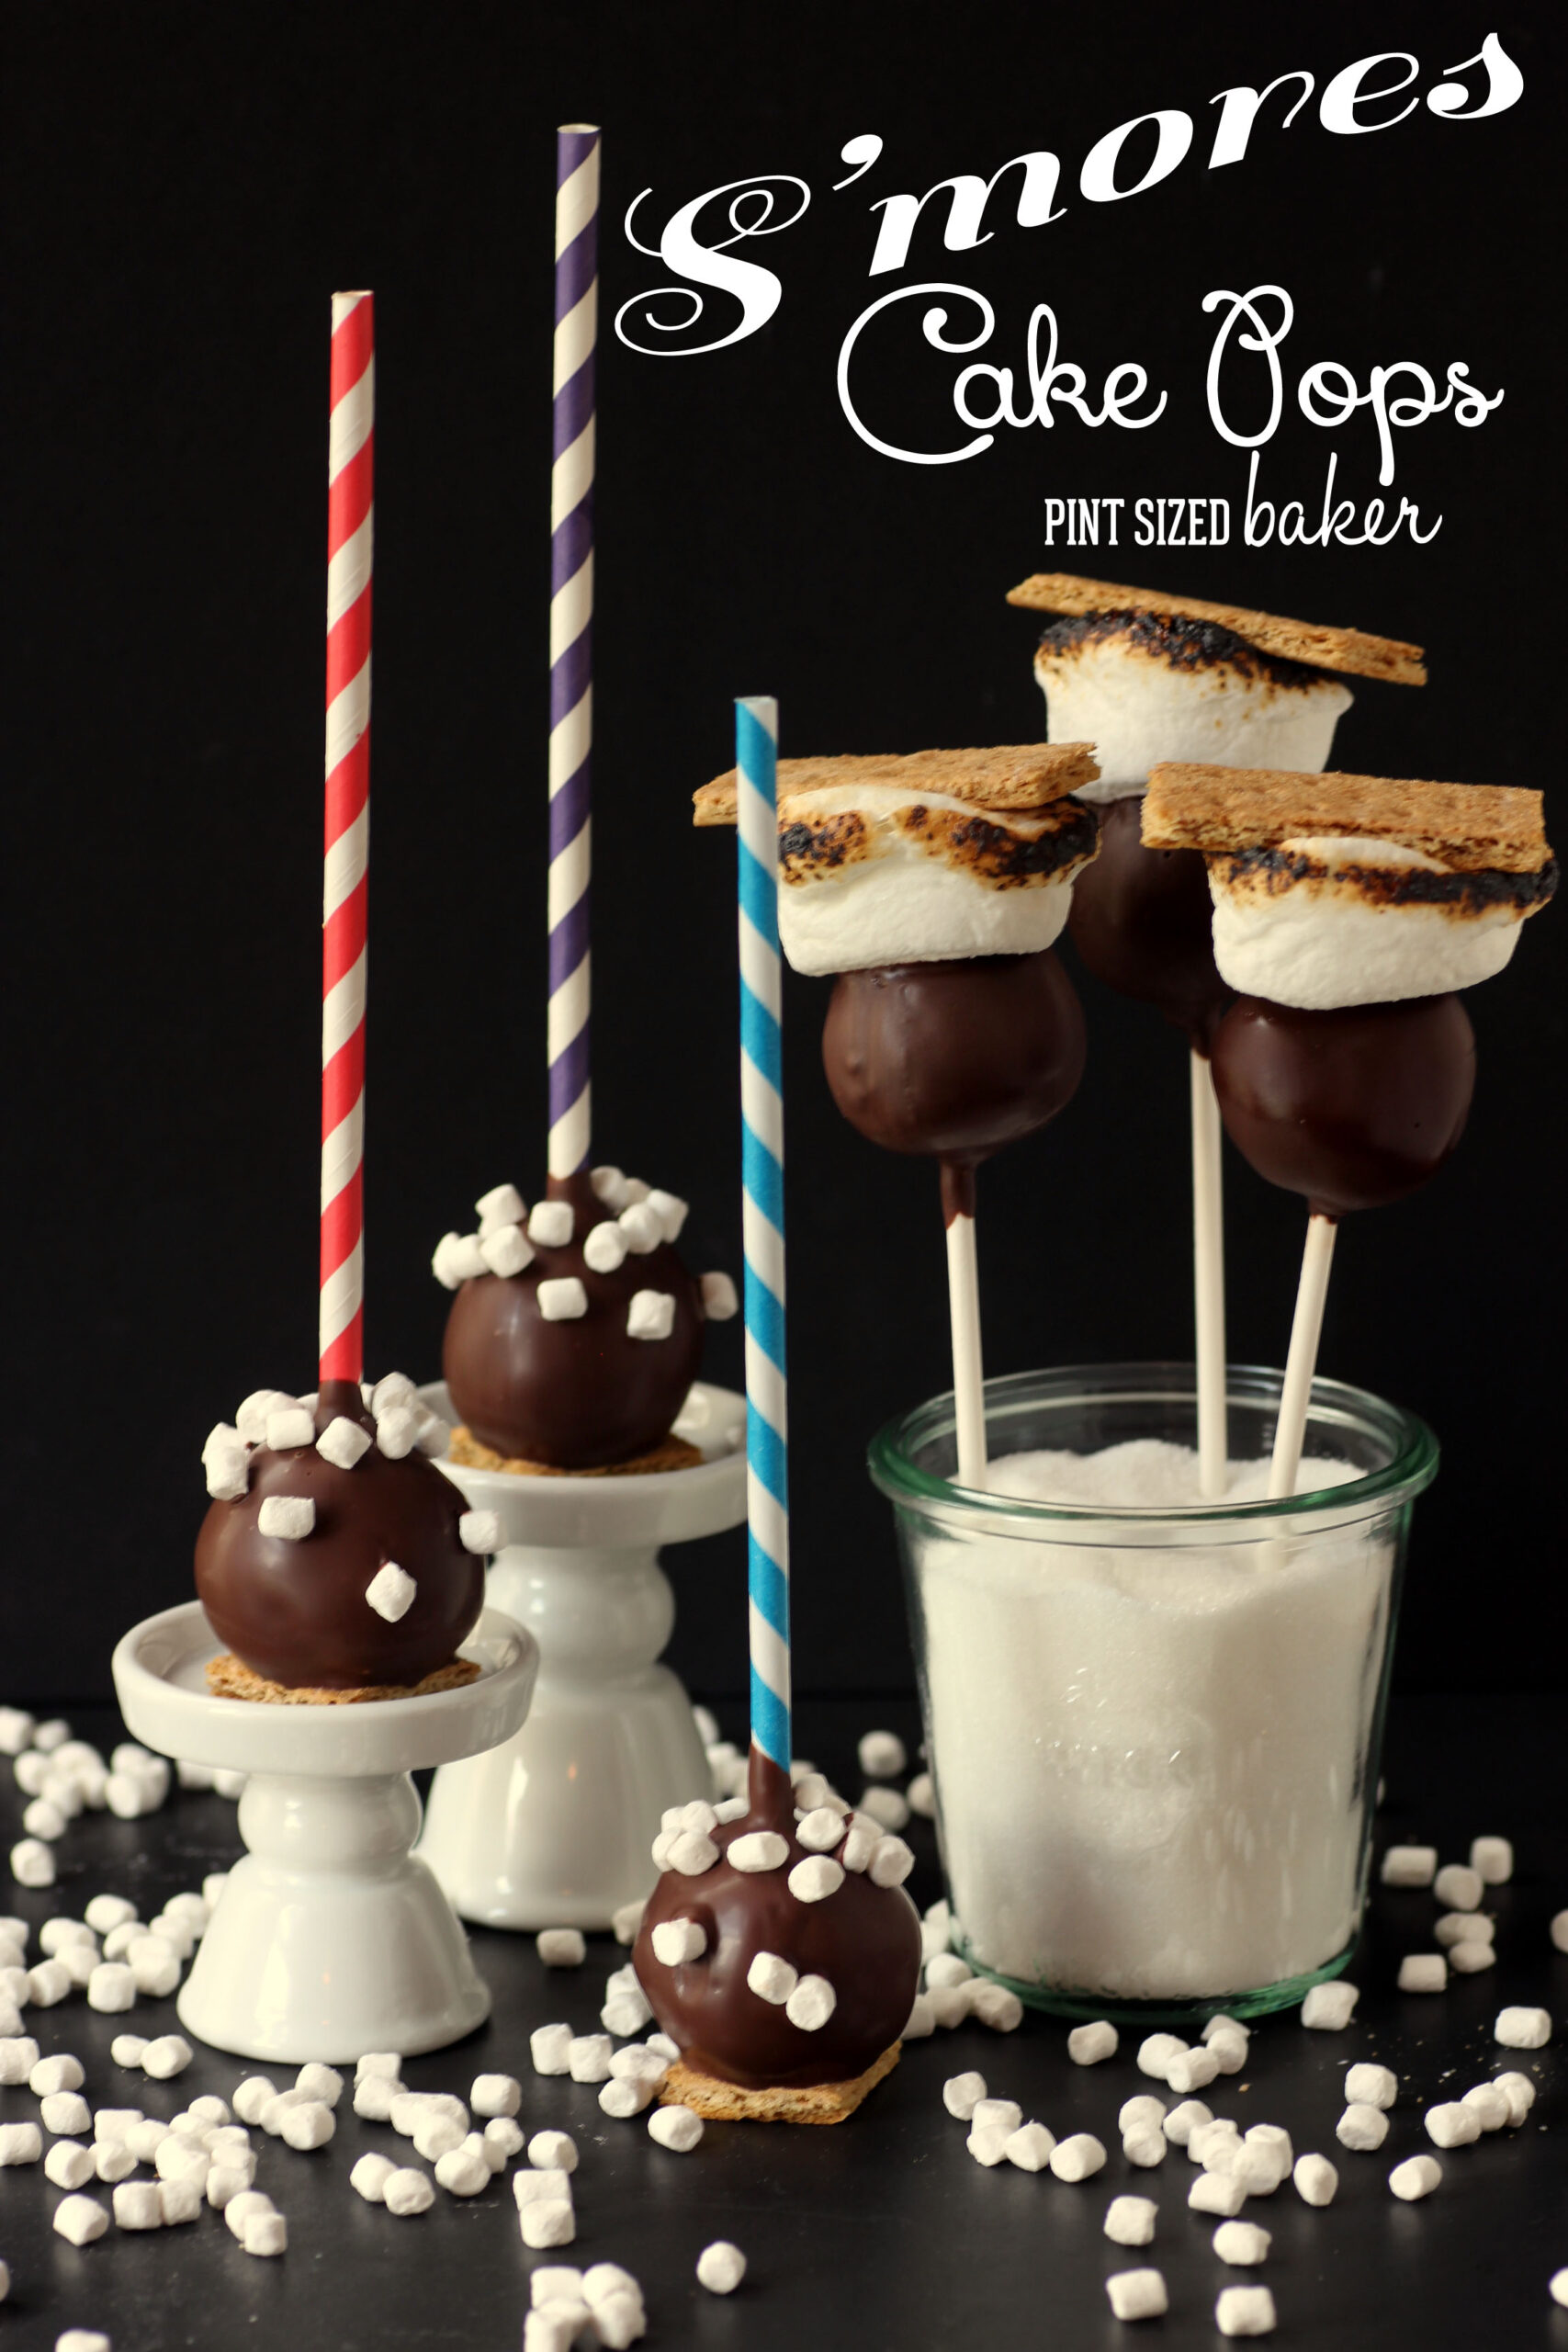 S'Mores Cakesicles Are a Fun Way to Enjoy This Classic Treat!